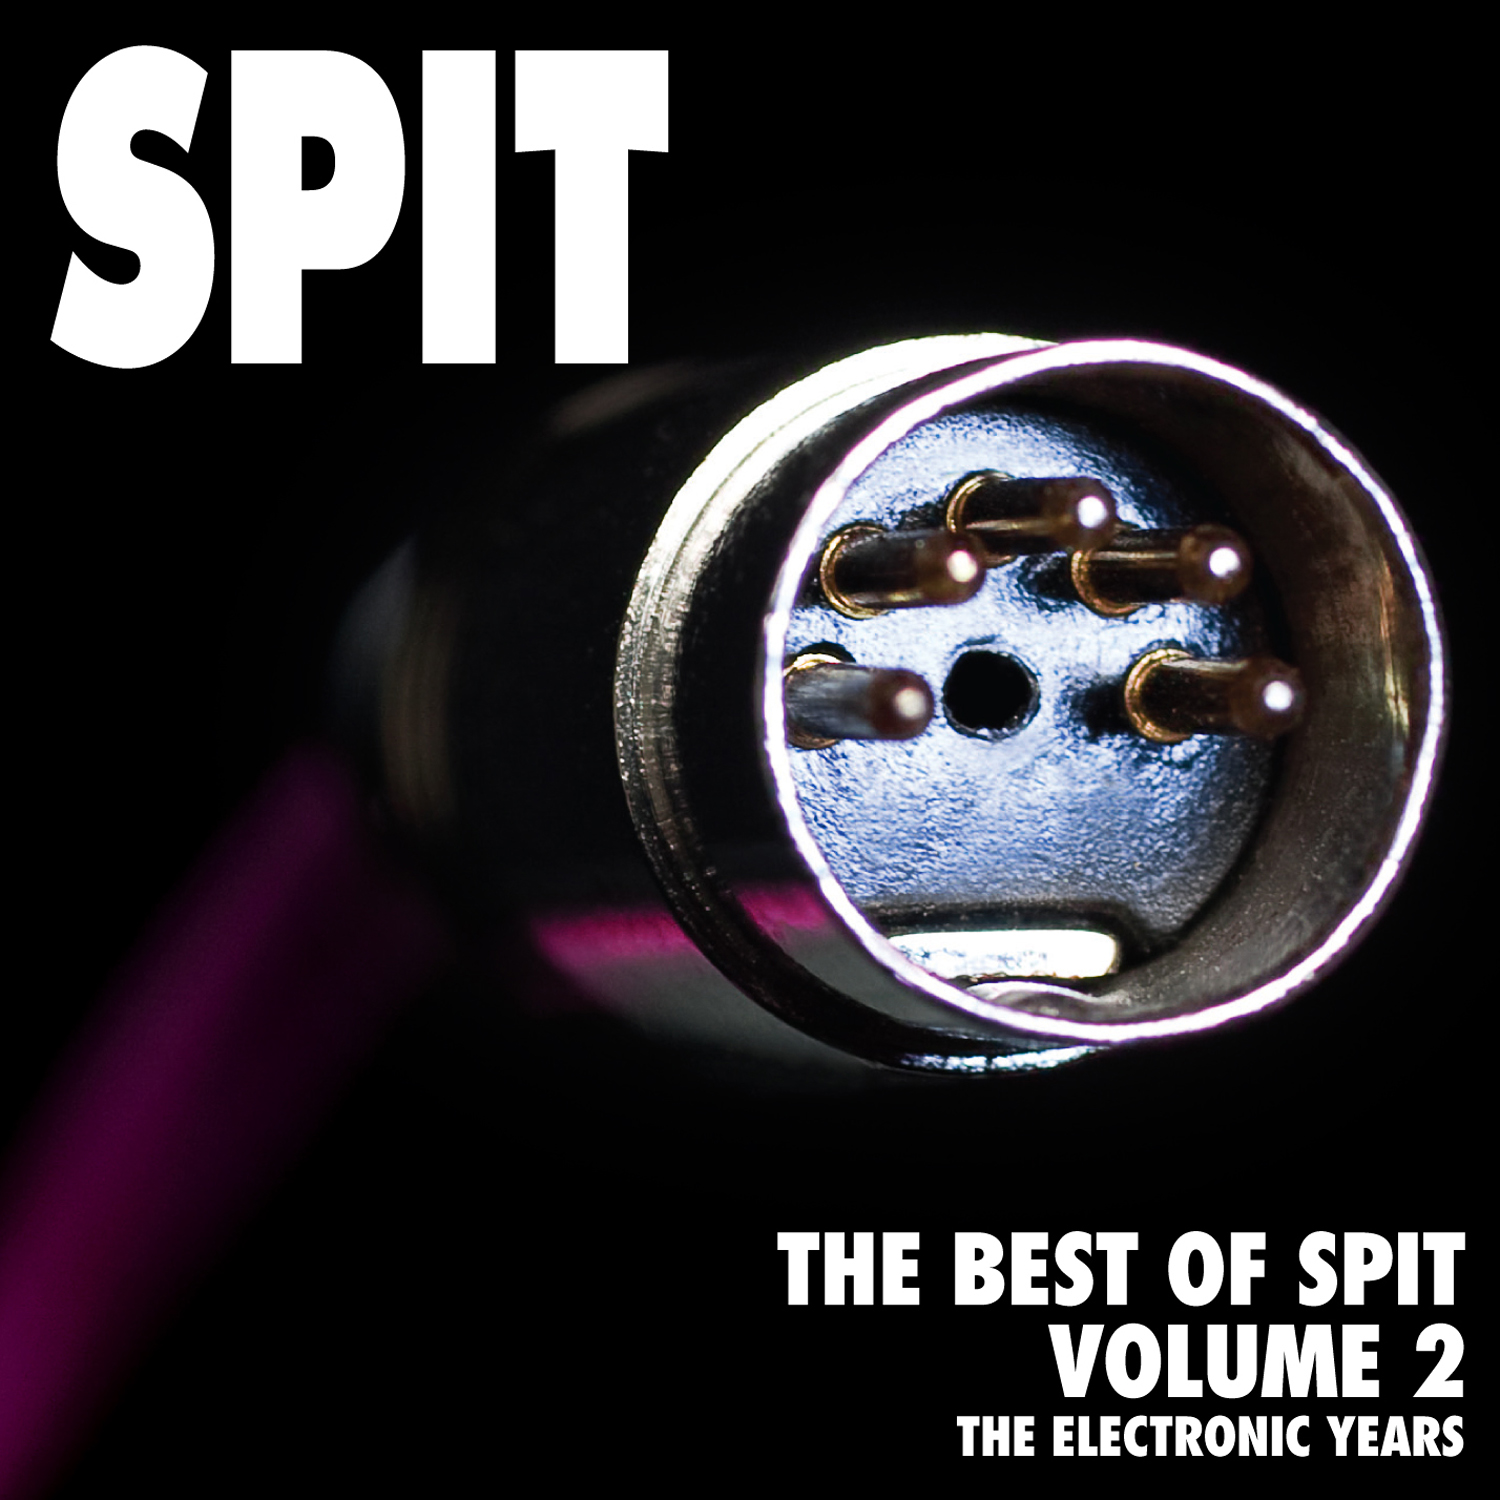 The Best of Spit: Vol 2, The Electronic Years